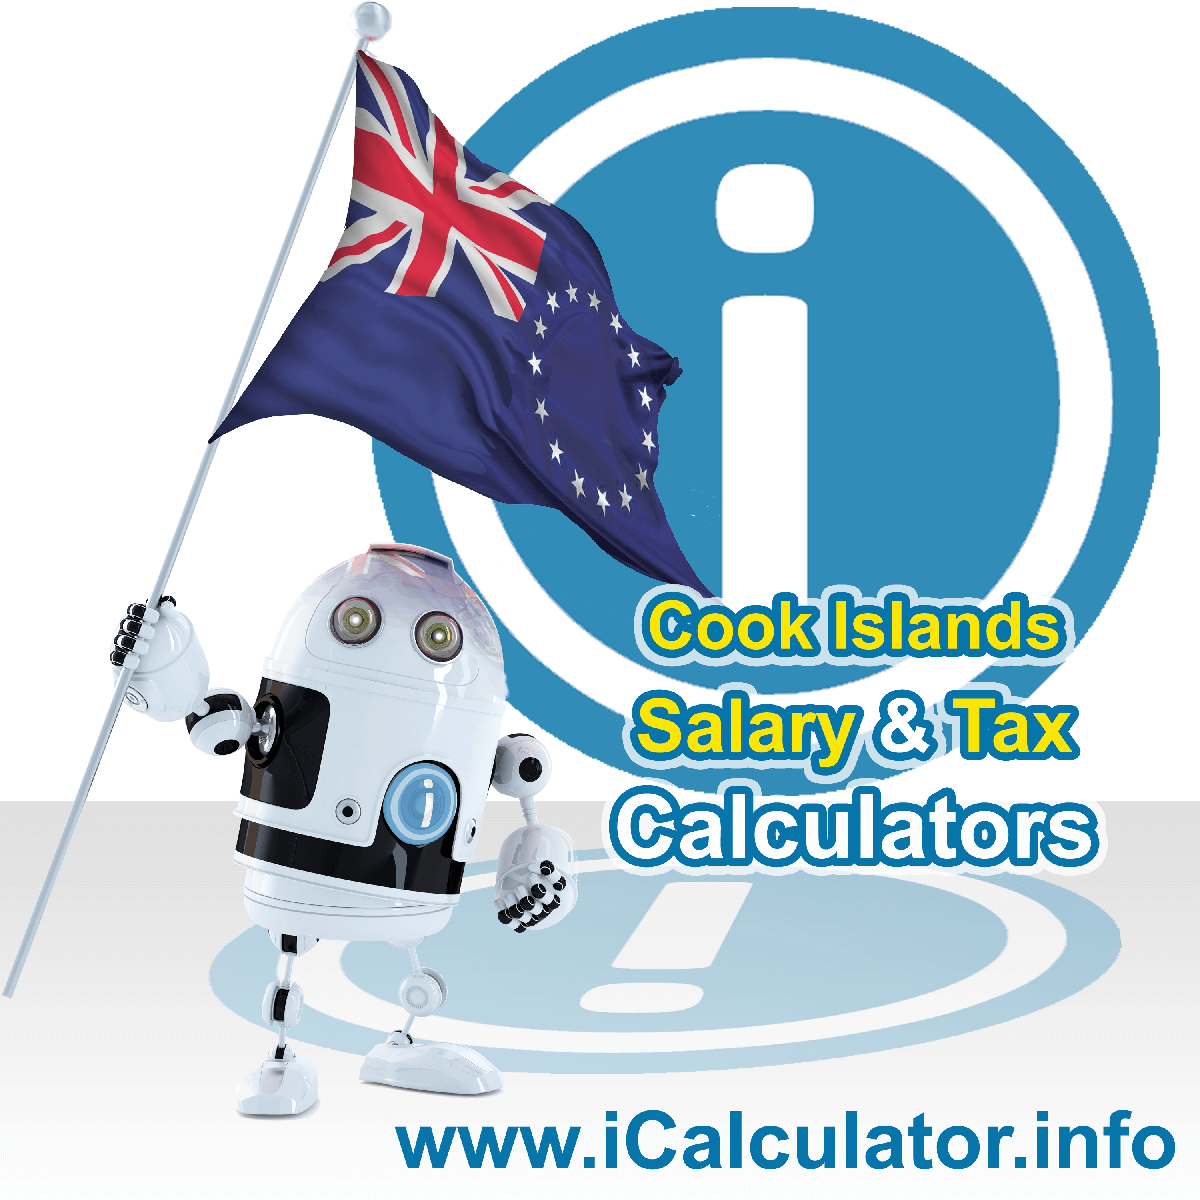 Cook Islands Salary Calculator. This image shows the Cook Islandsese flag and information relating to the tax formula for the Cook Islands Tax Calculator